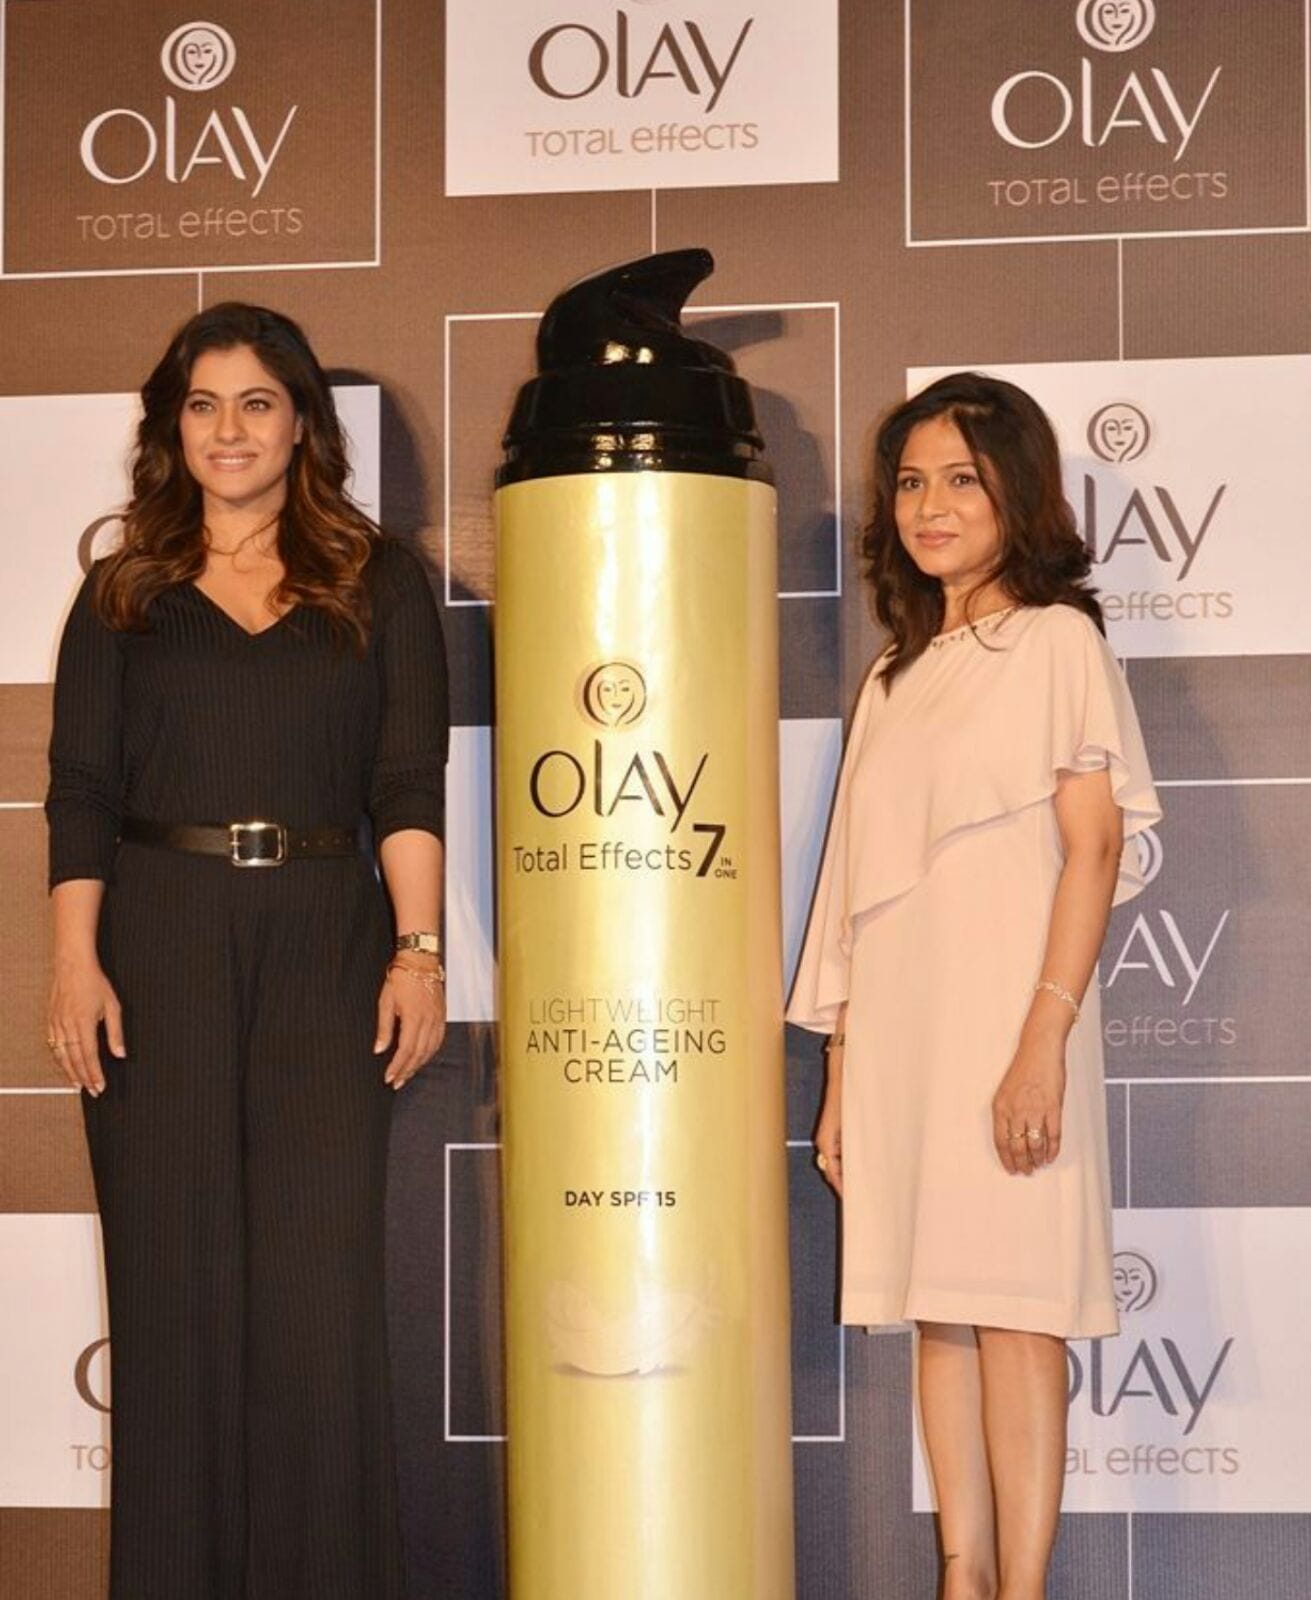 Unveling Olay Total Effects along with Kajol